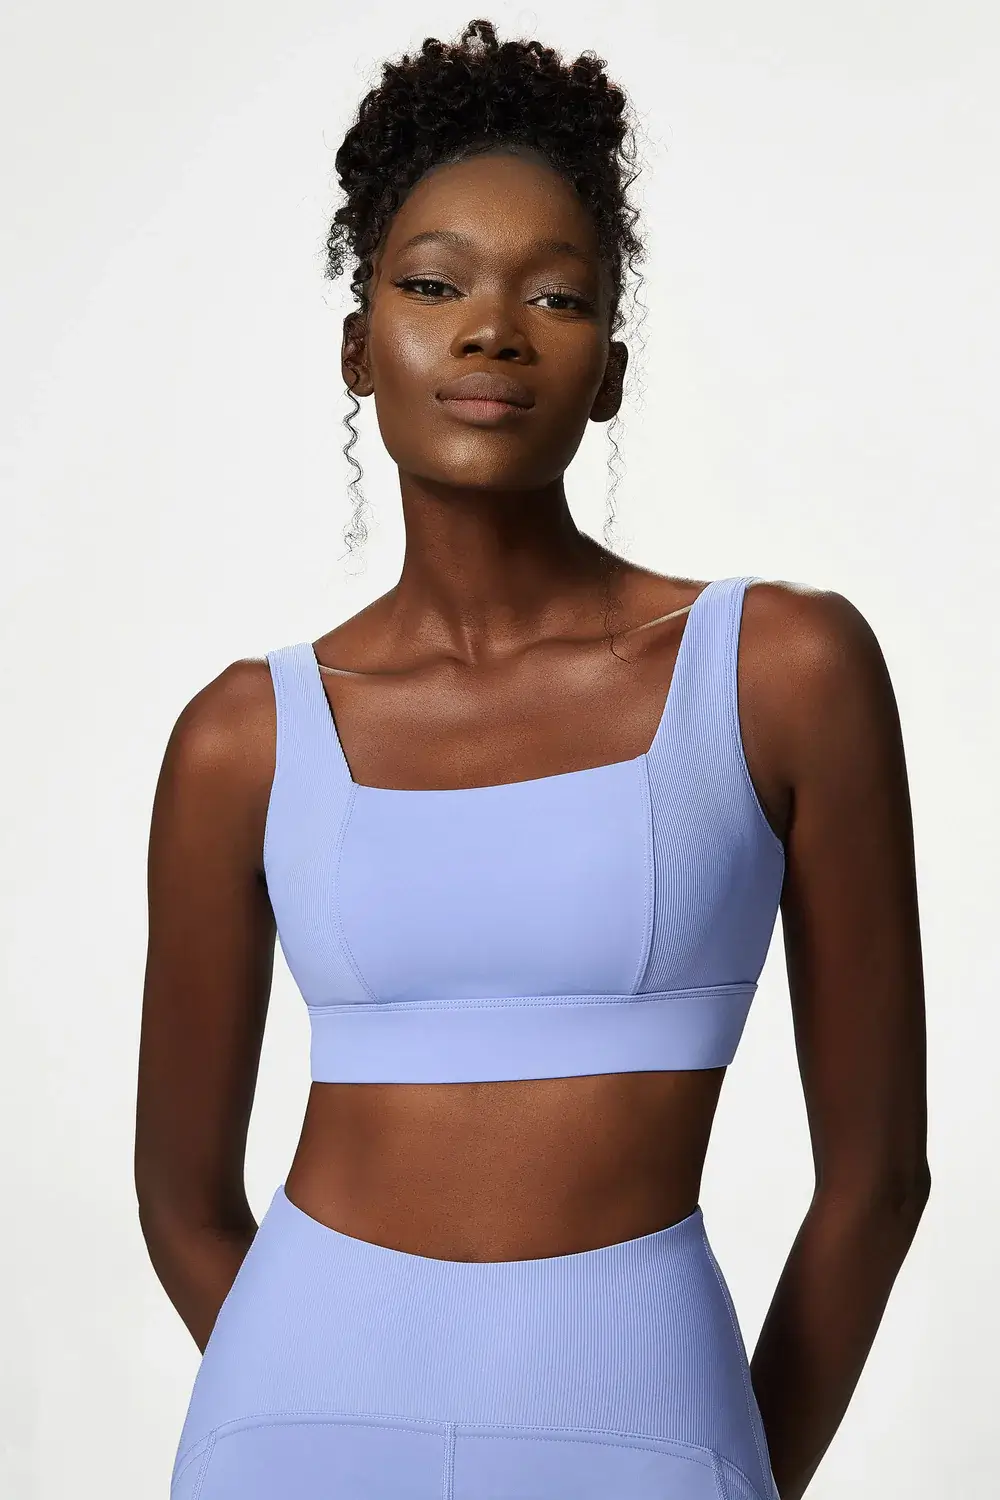 If You're Tired Of Running Out Of Activewear, Buy These Sports Bras Now